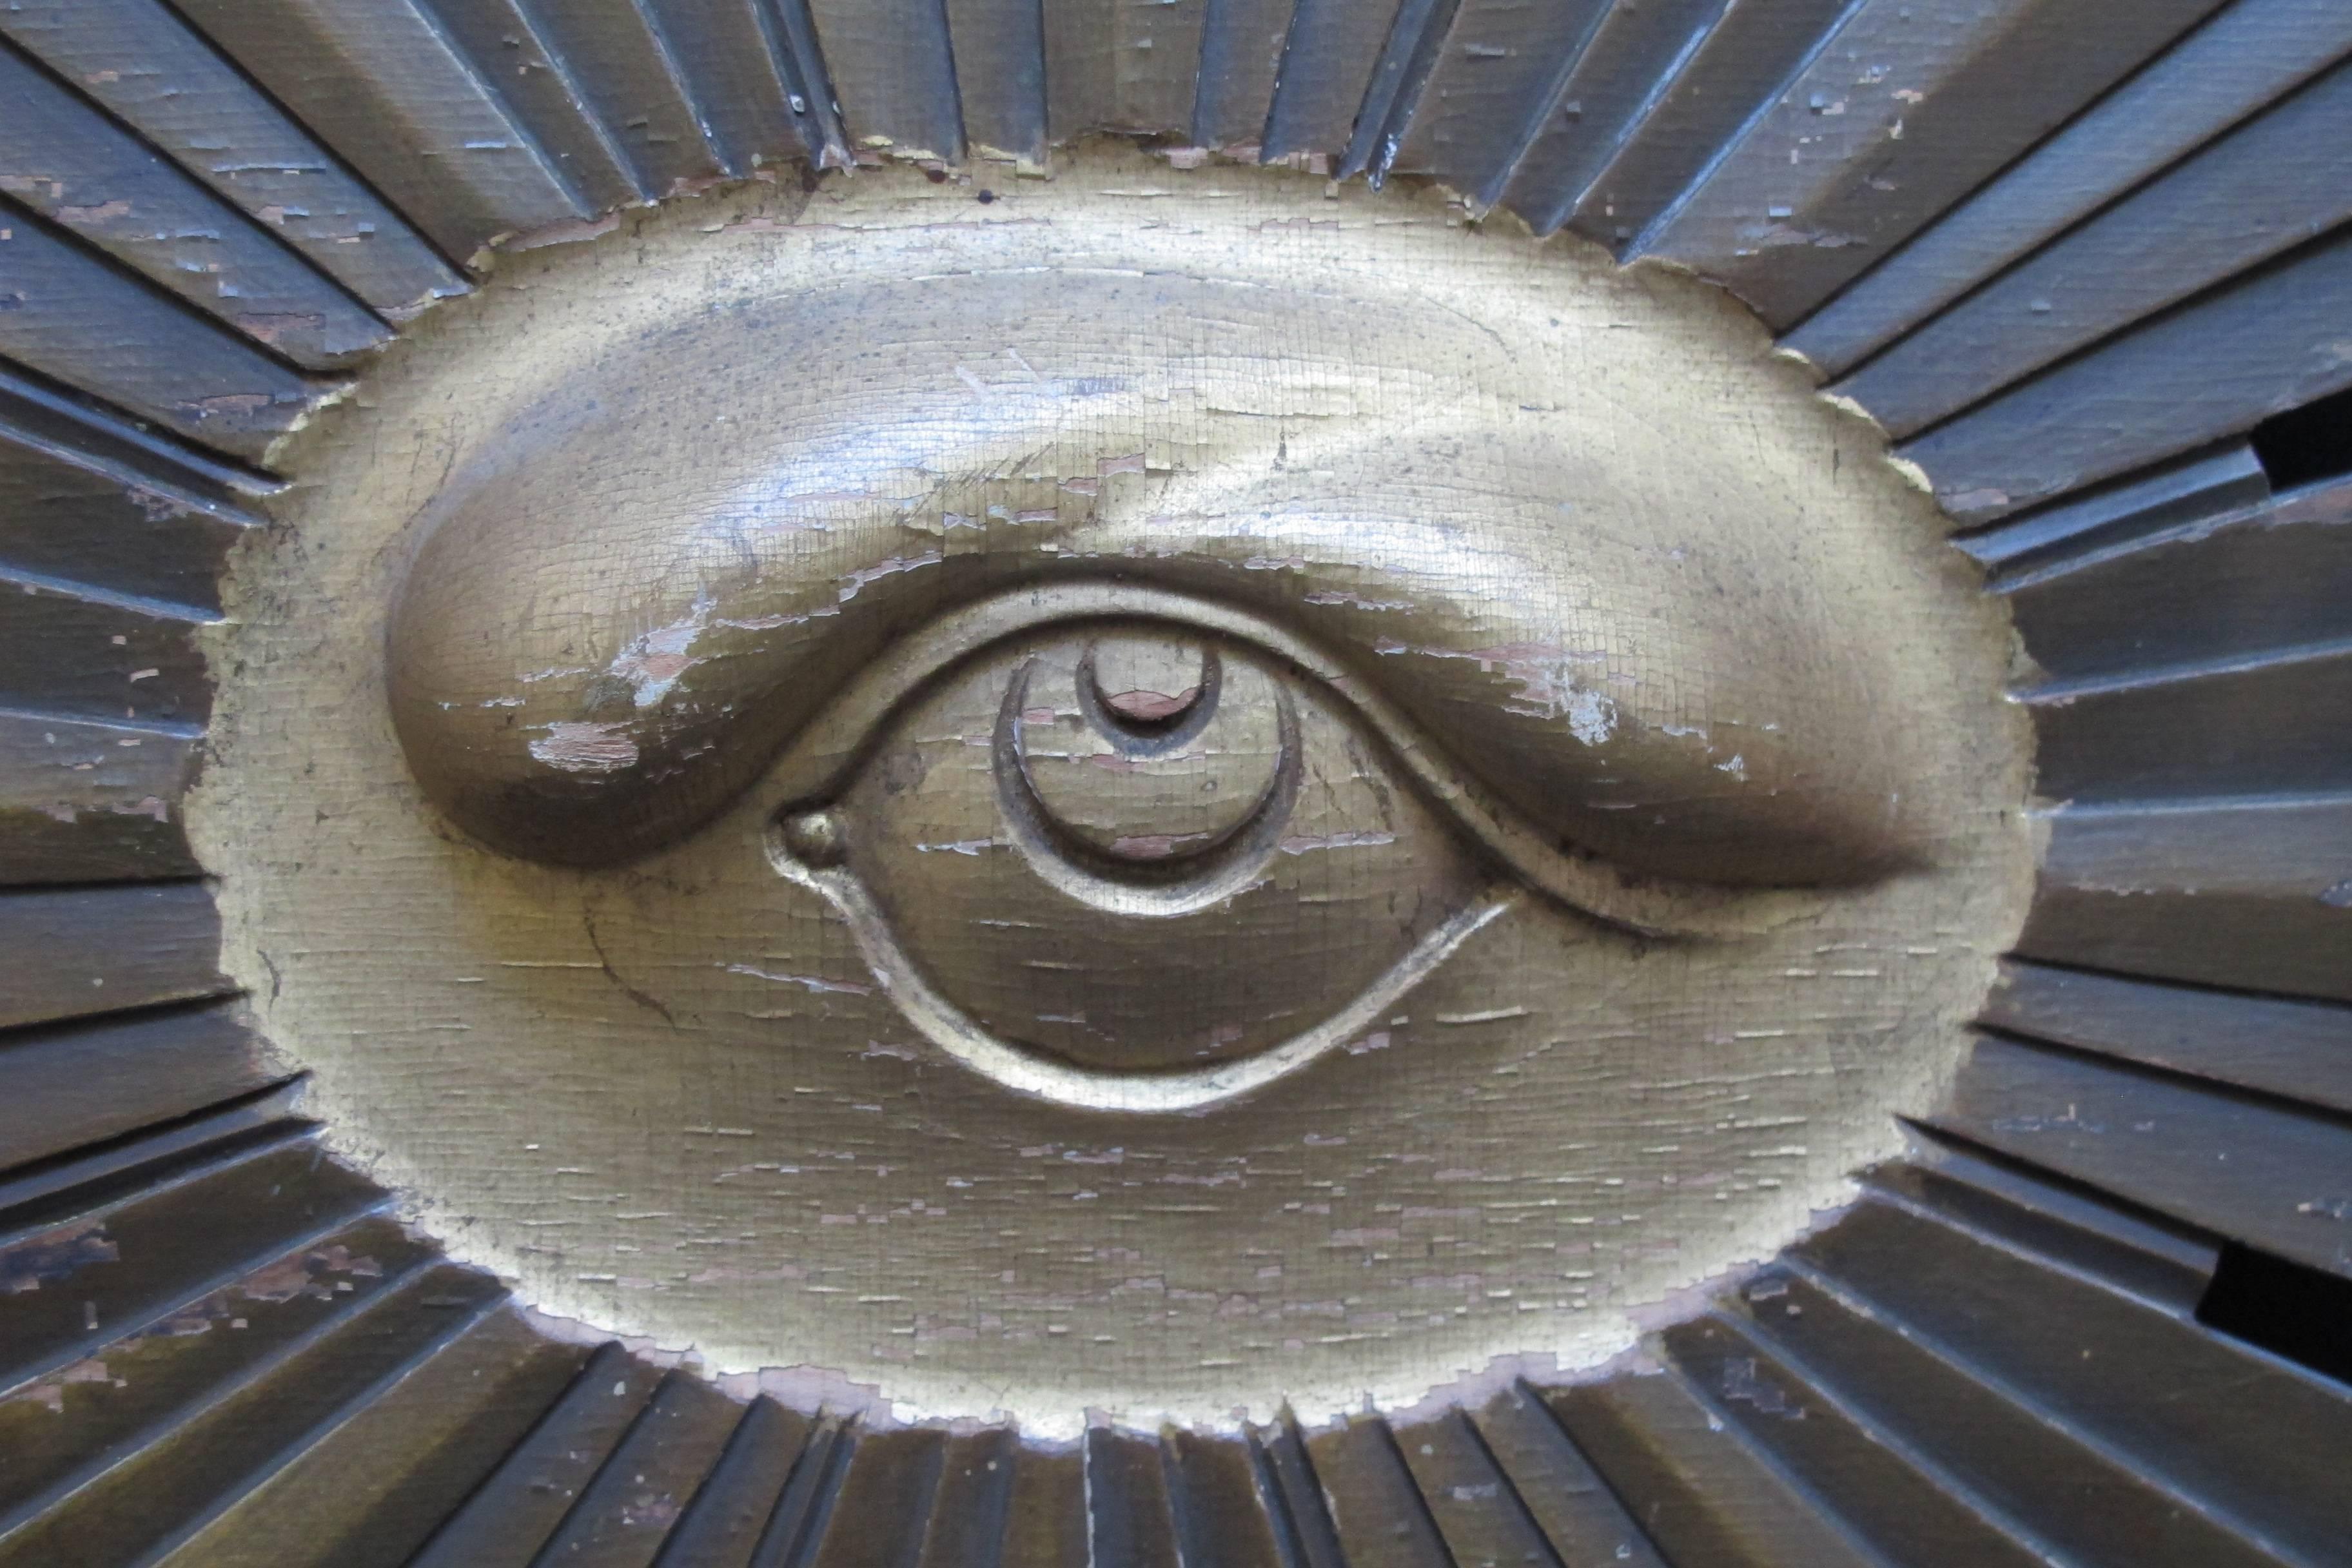 Among the membership of the early American fraternal lodges many signs and symbols were used to inspire the members. One of the most beautiful was the all seeing eye of God that was adapted by both the Order of Odd Fellows and the Masons. This id a